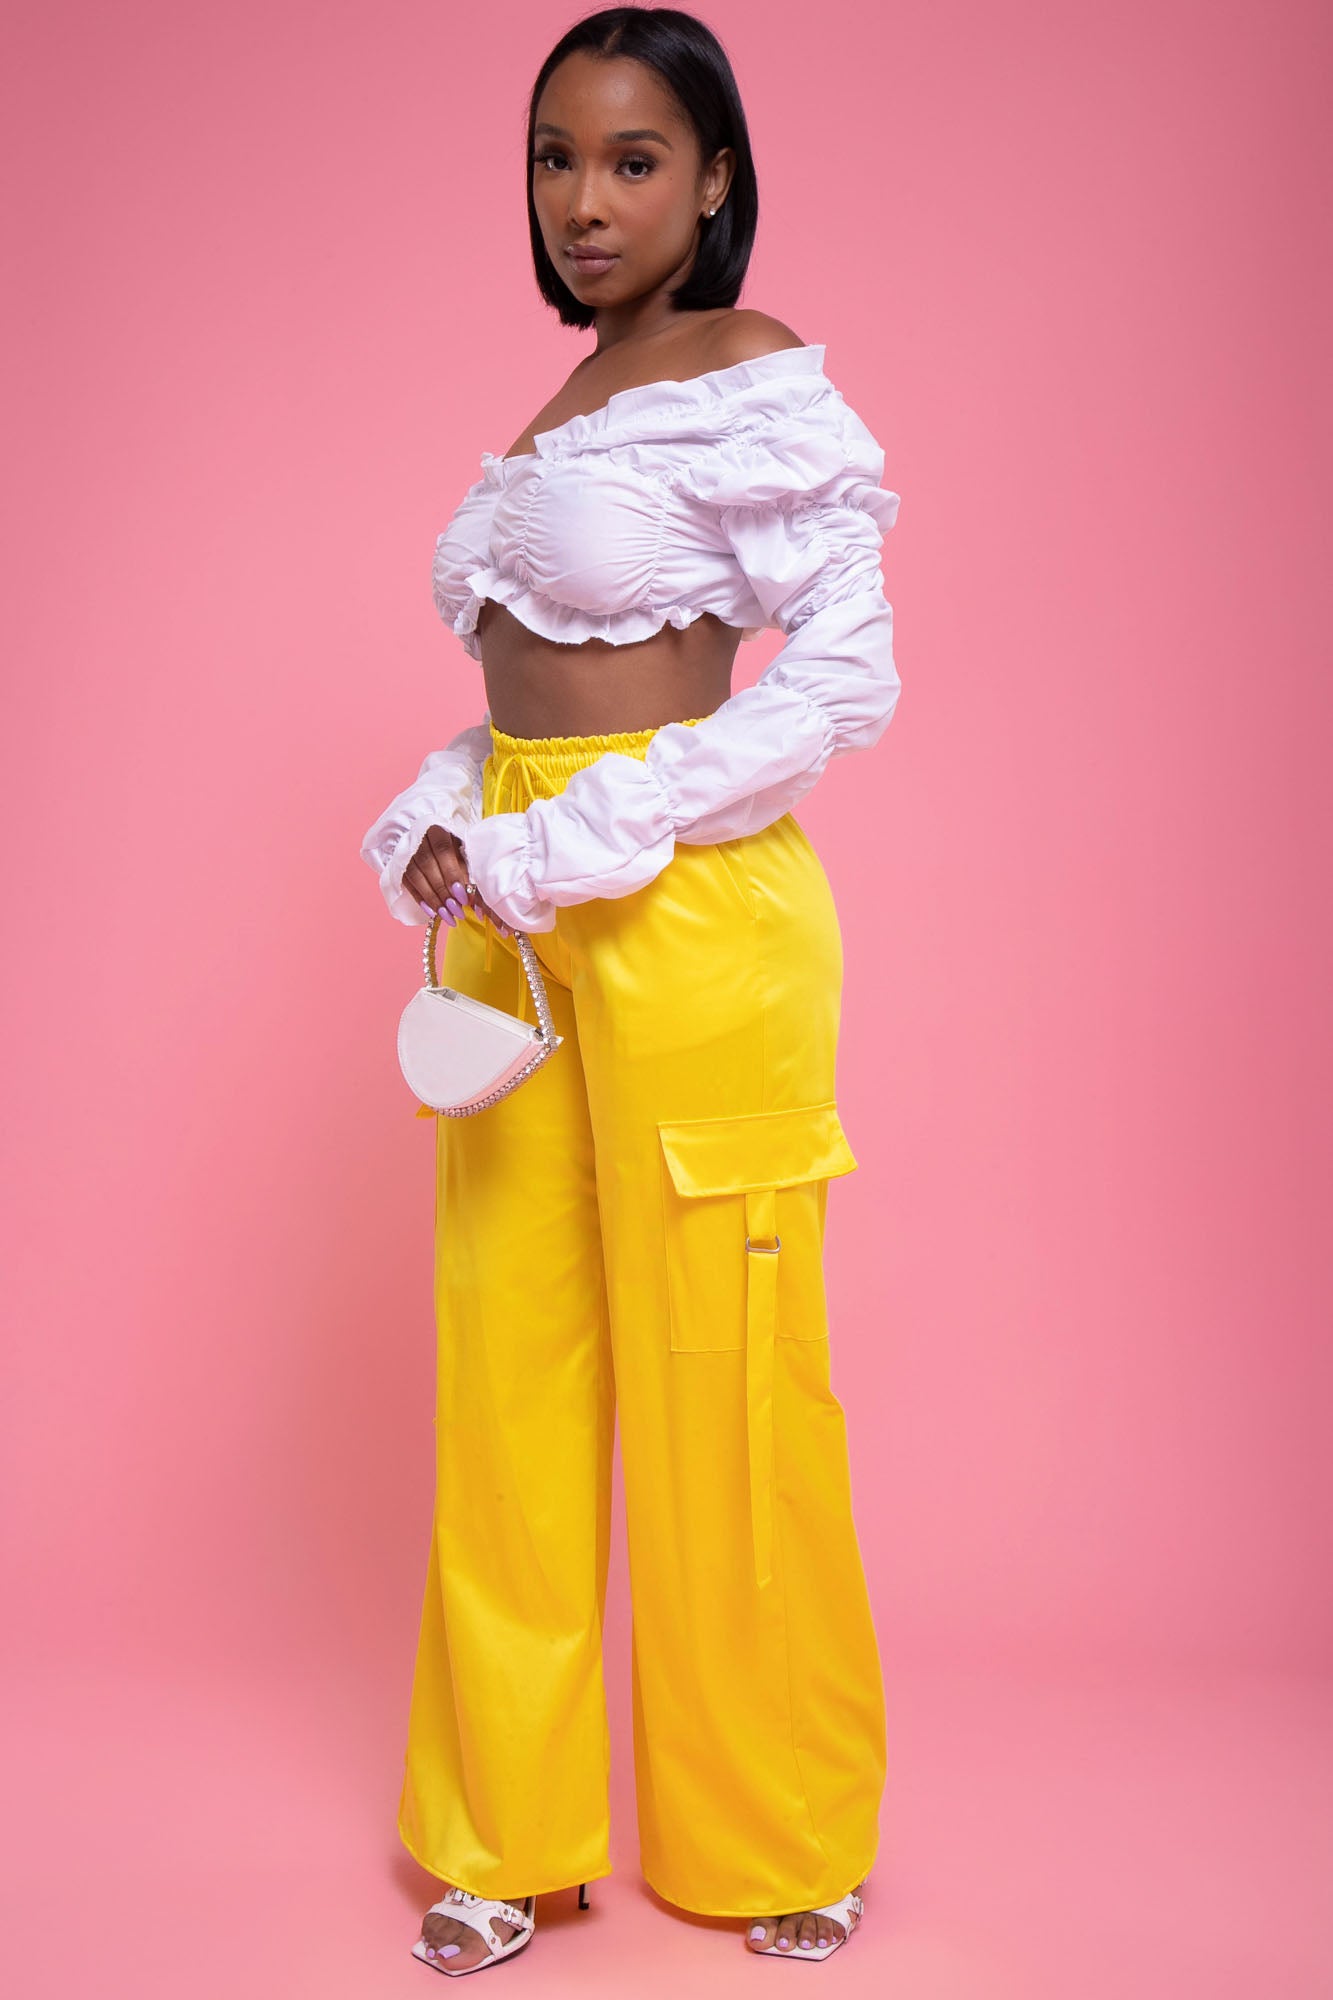 A woman in yellow pants and a white t - shirt photo – Free Shoe Image on  Unsplash